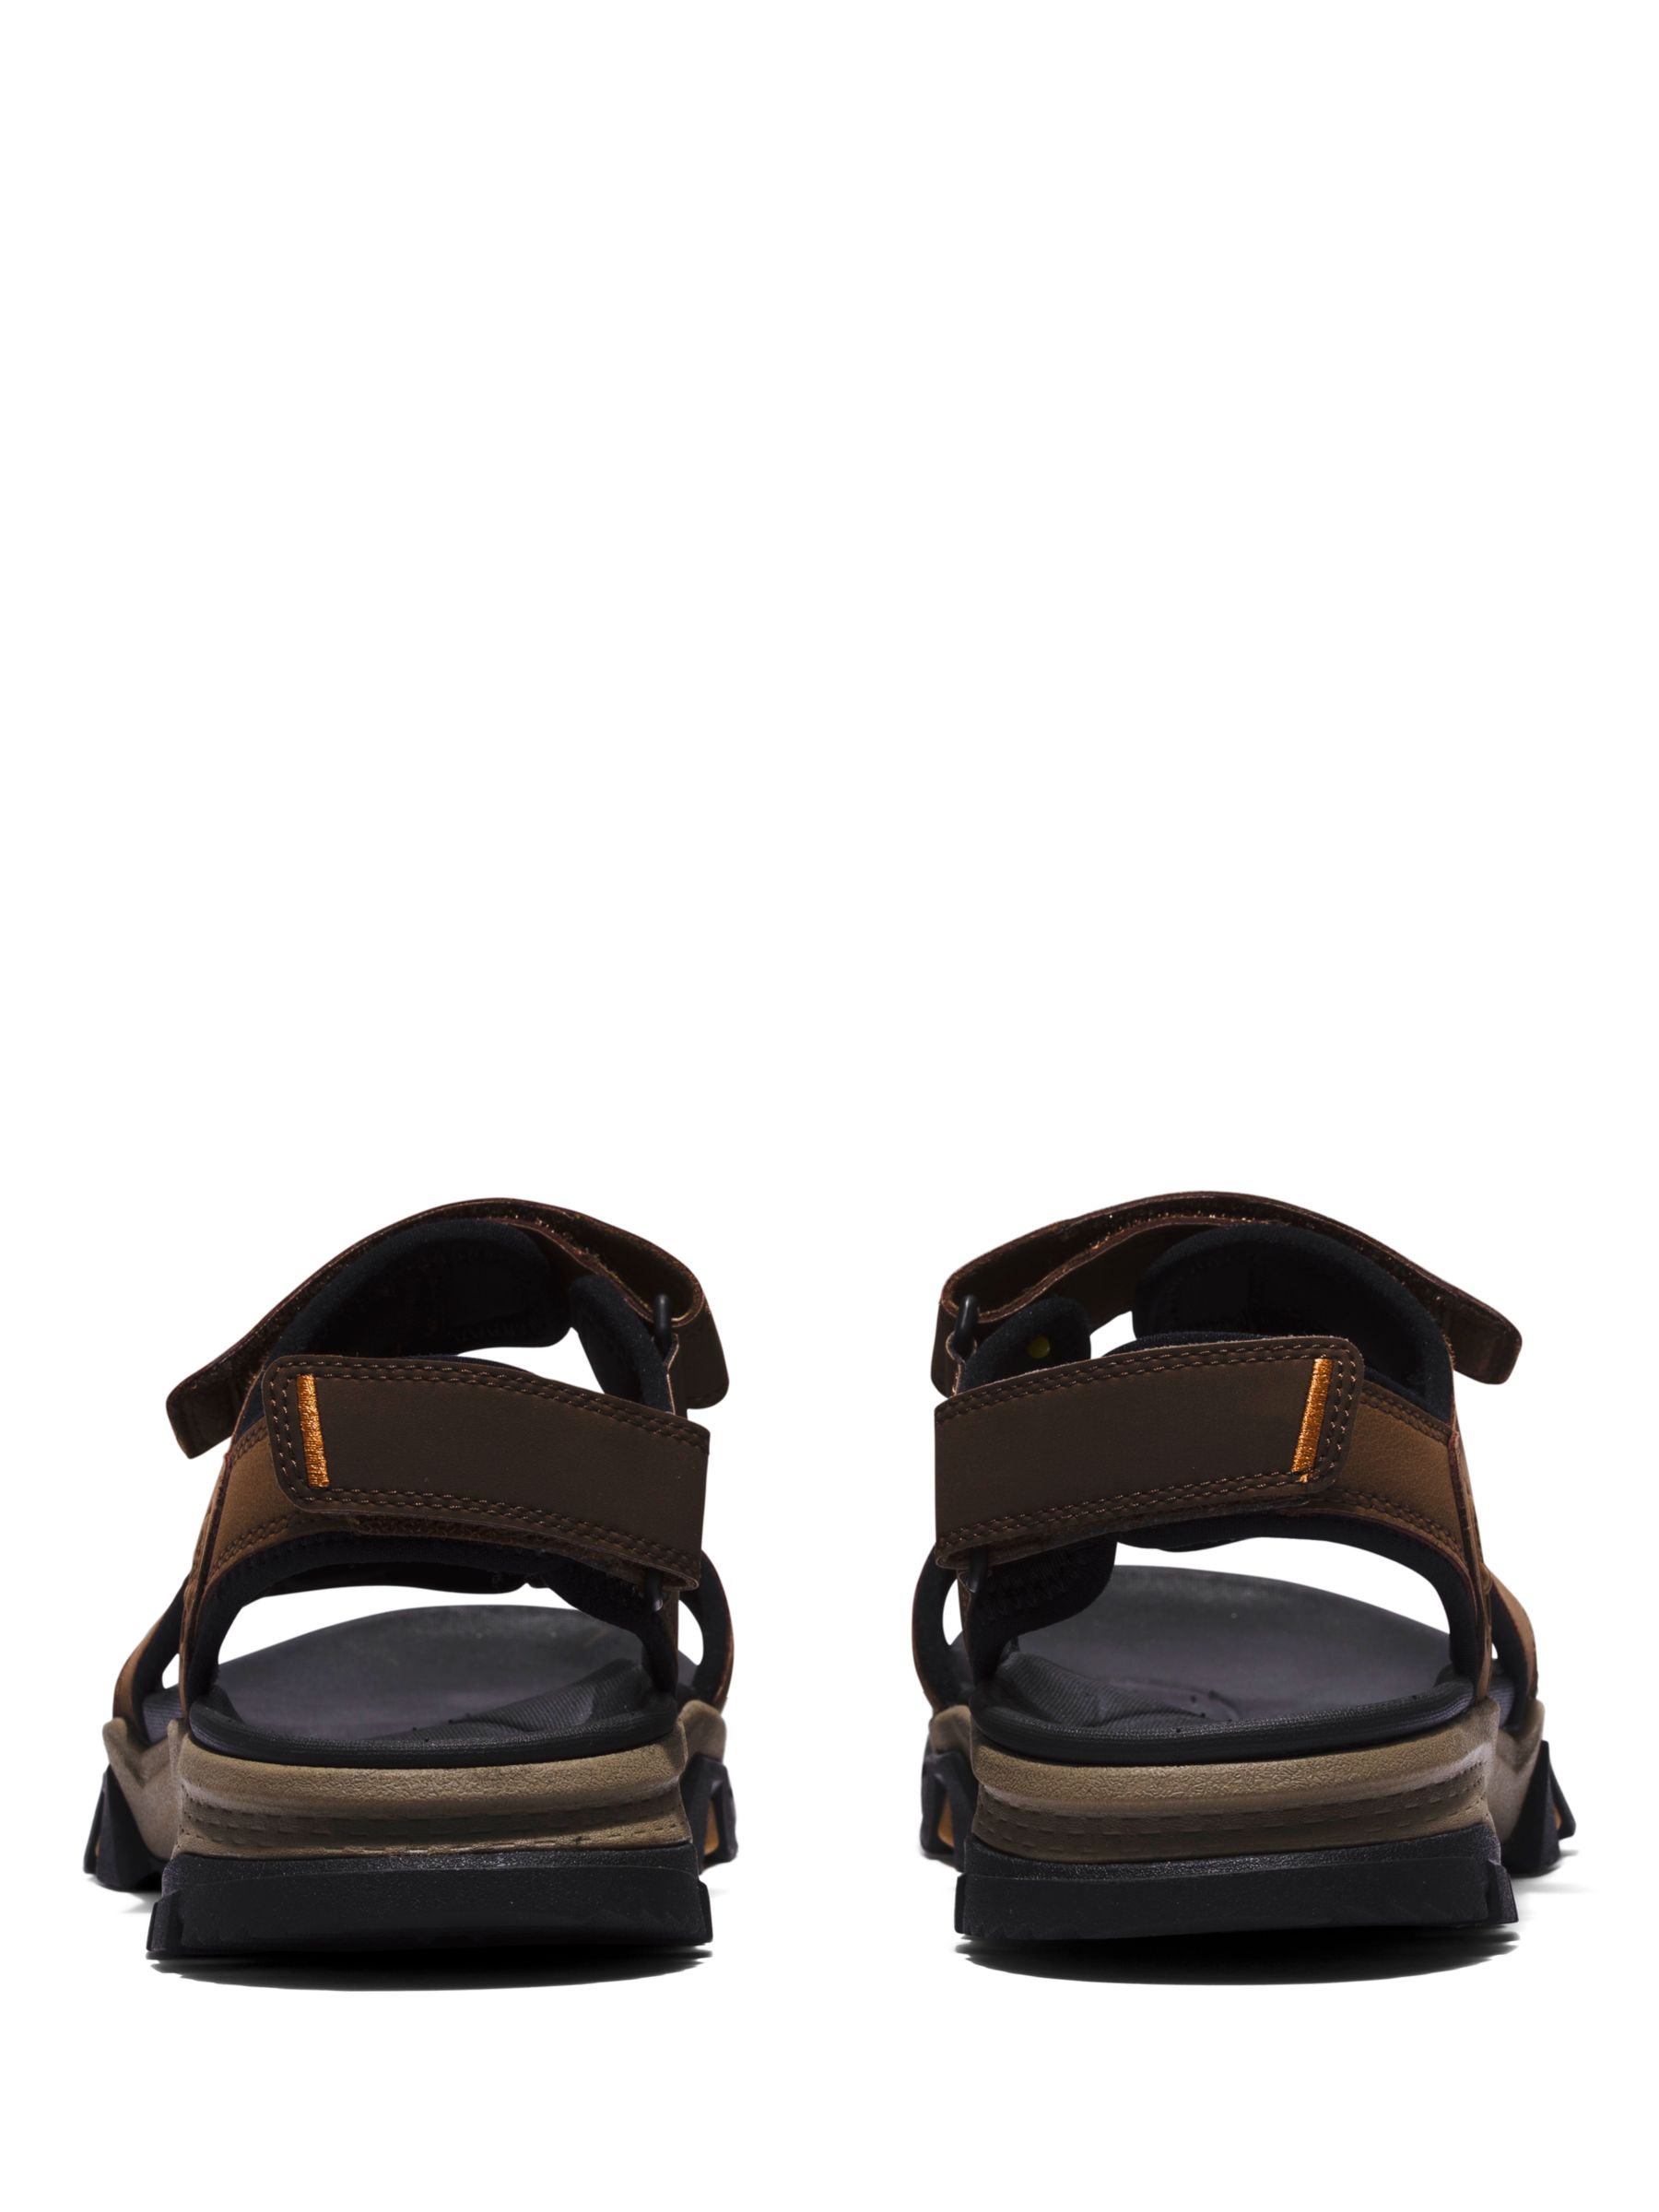 Timberland Lincoln Peak Leather Sandals, Brown, 9.5